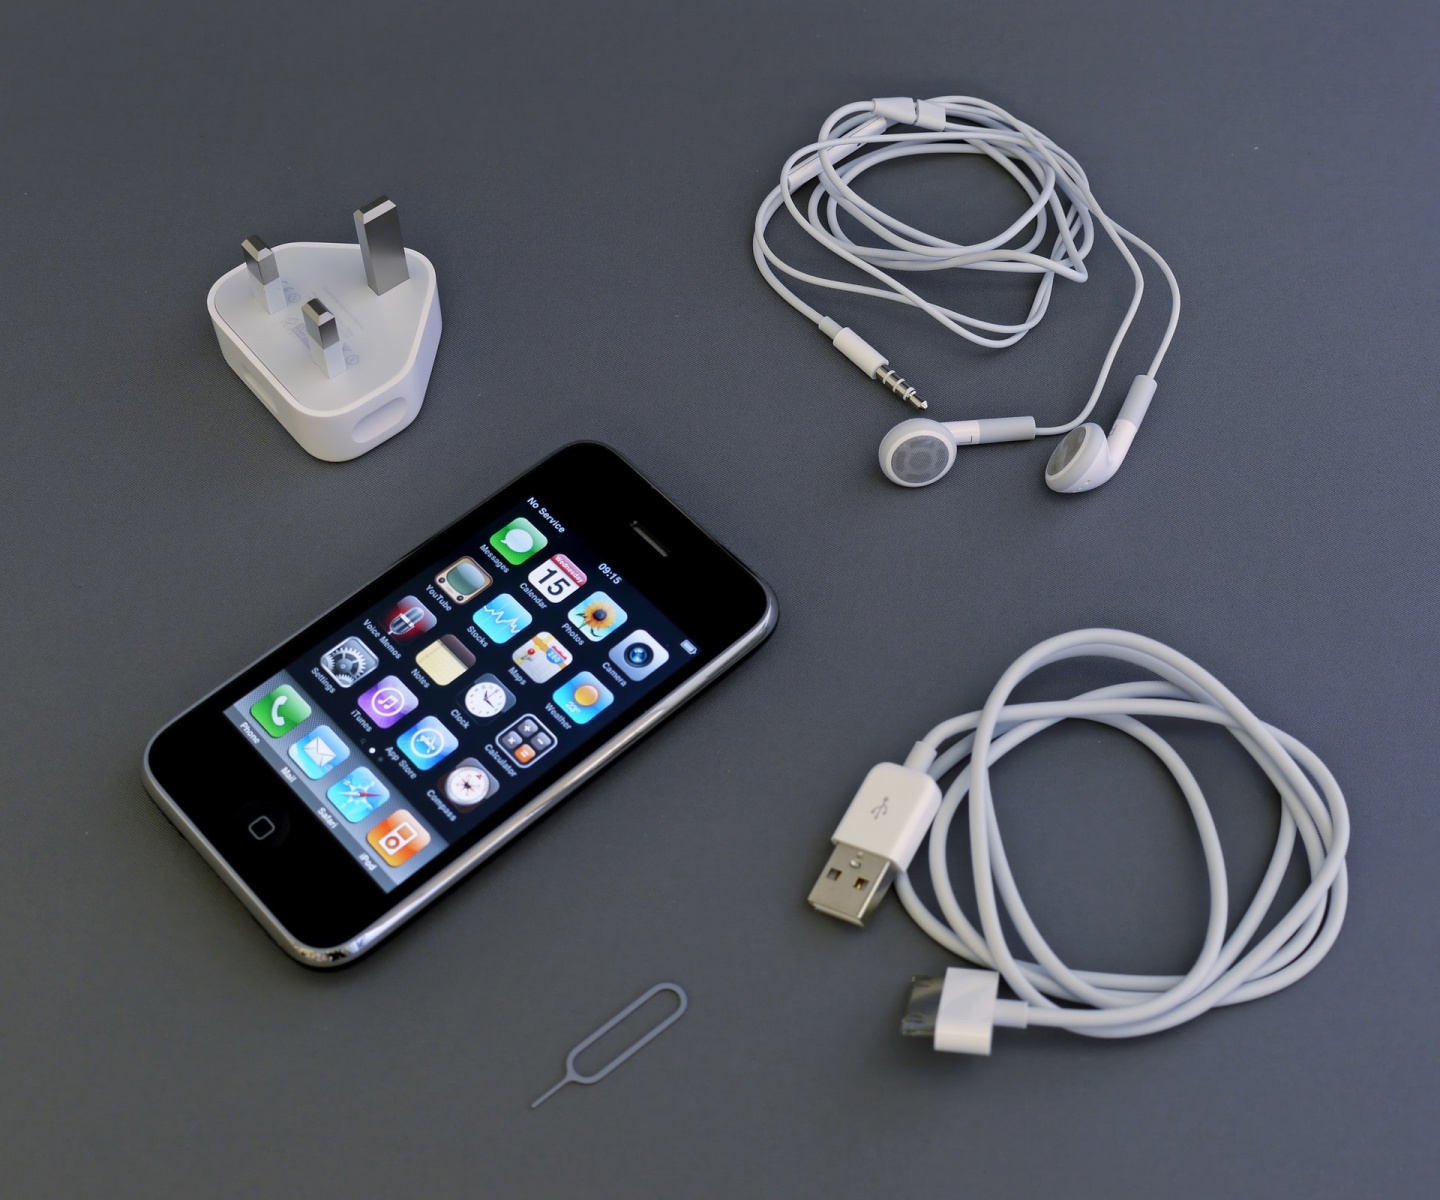 iPhone 12 Accessories: To be Surprisingly Sold Separately?